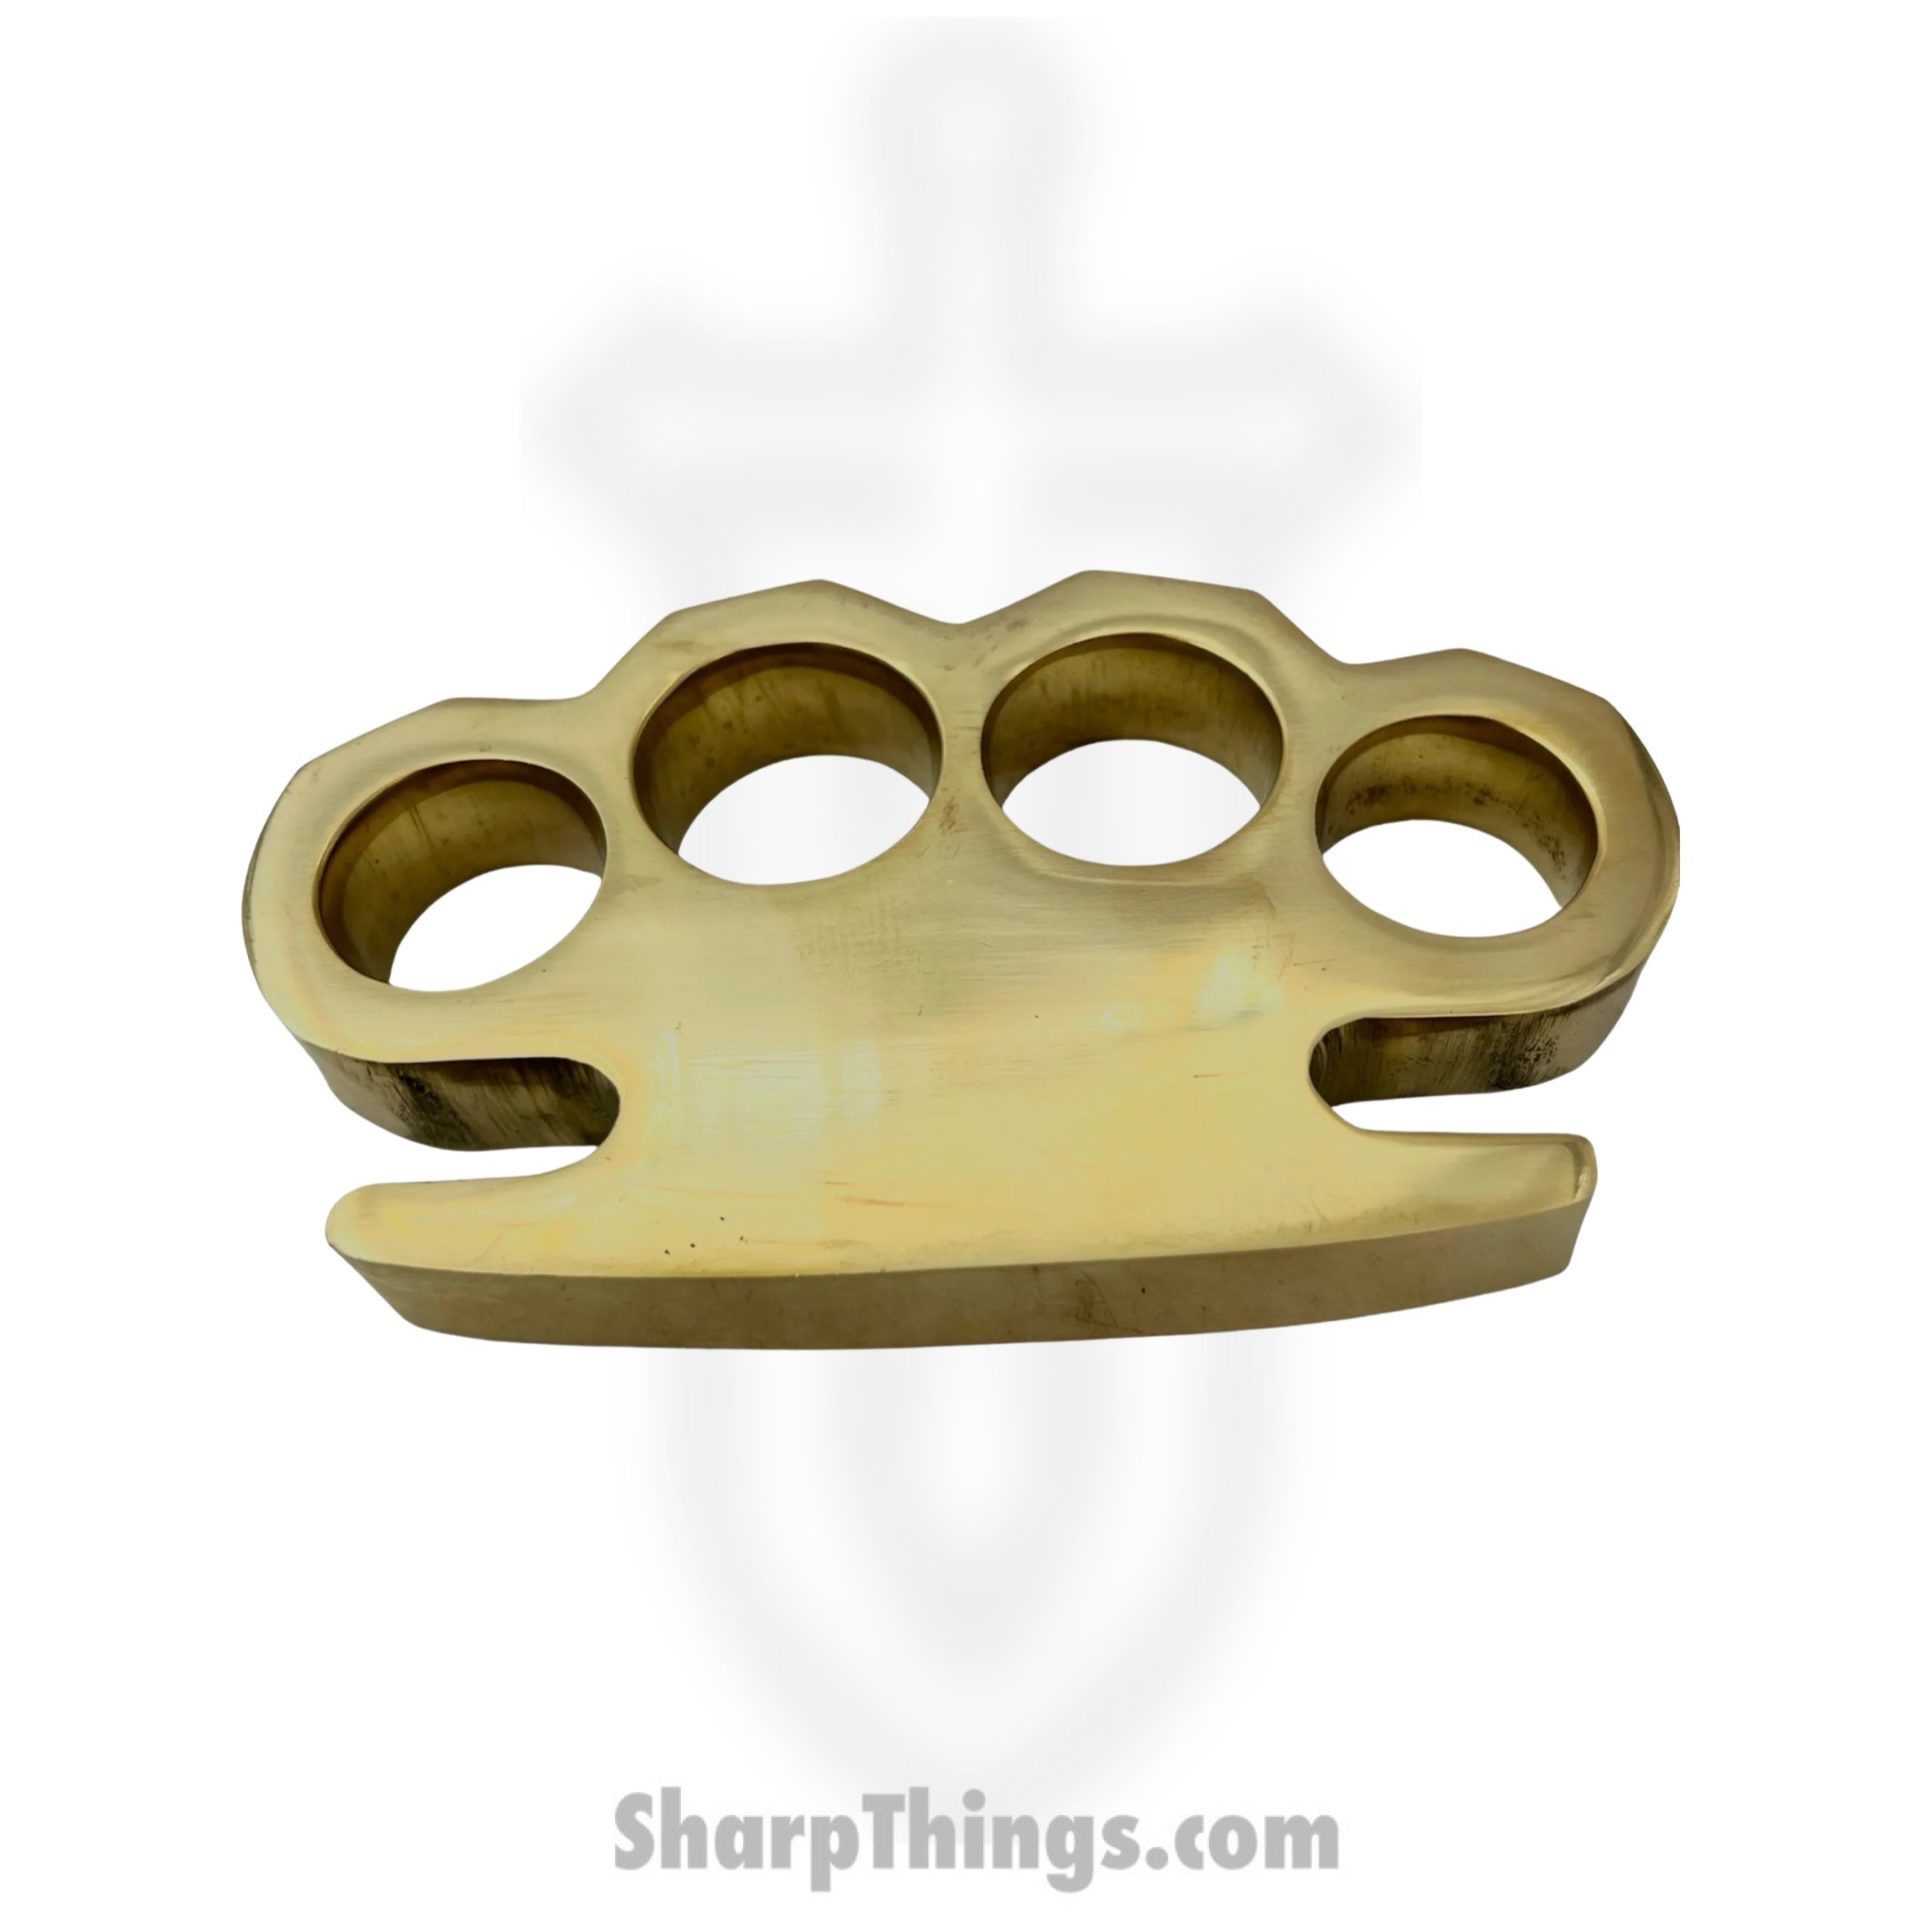 Misc - KT-001-BS - 650 Grams Solid Real Brass Knuckles - Sharp